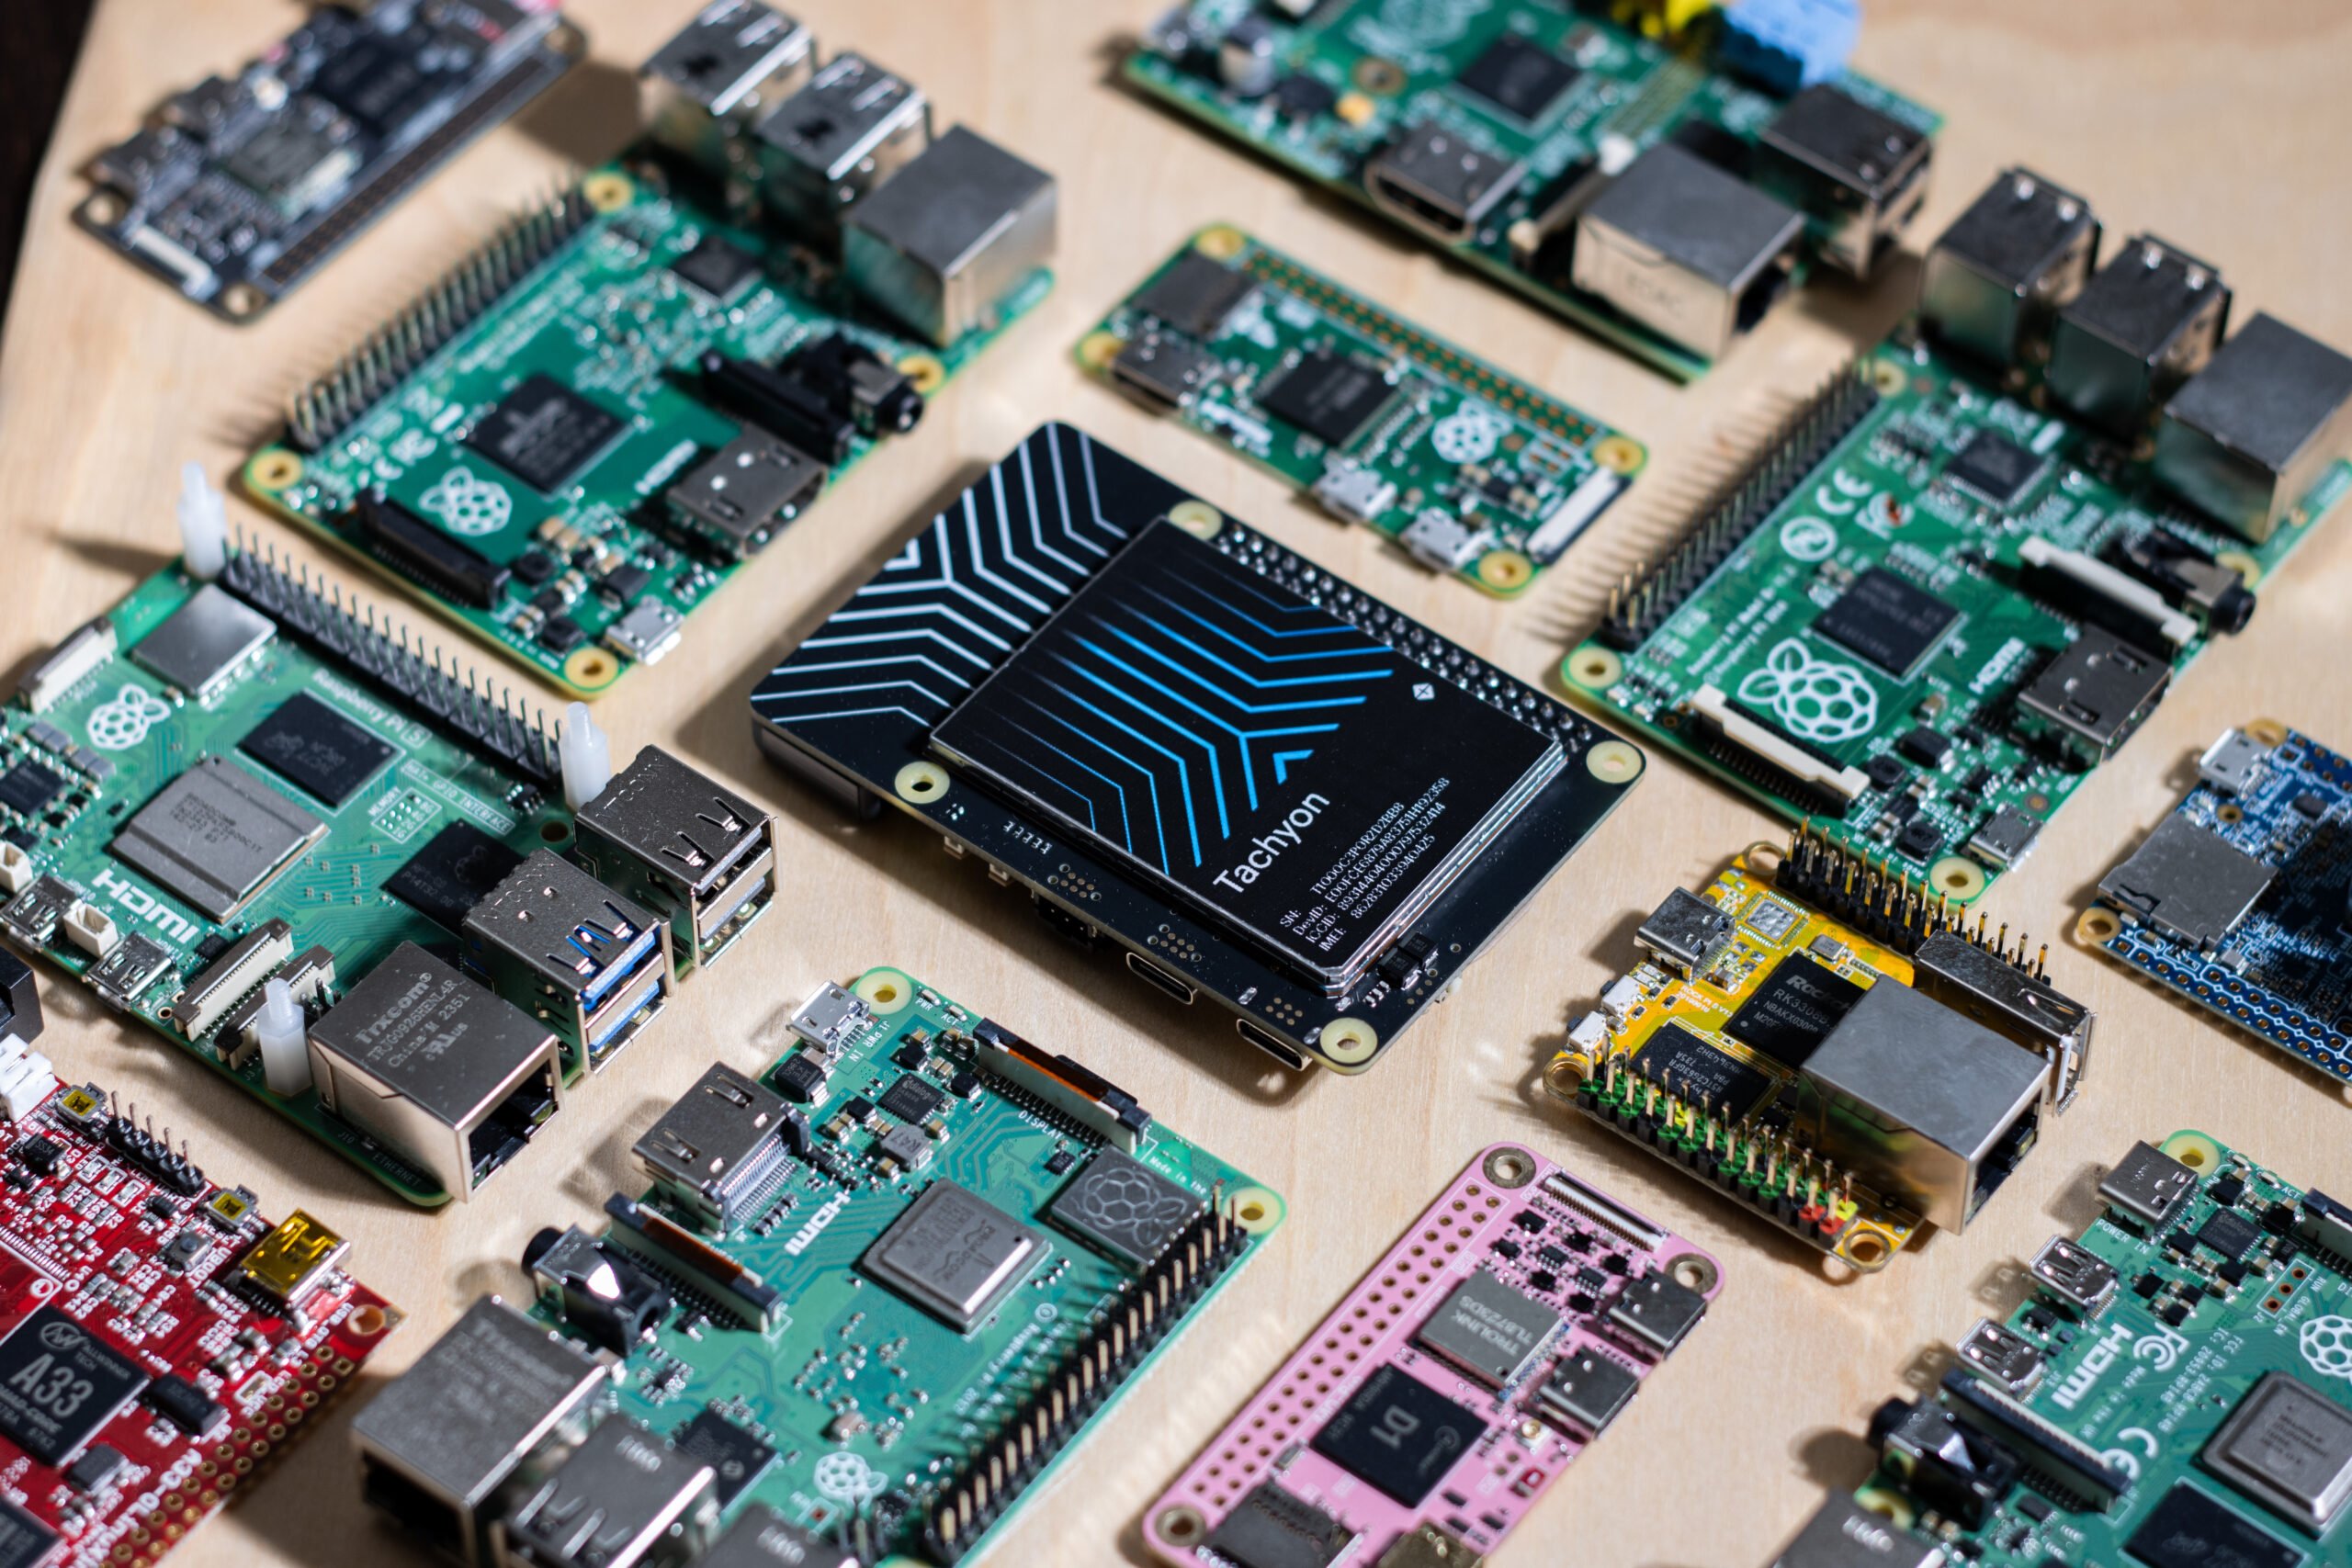 Particle Return to their Roots to Kickstart New AI-Enhanced 5G IoT SBC